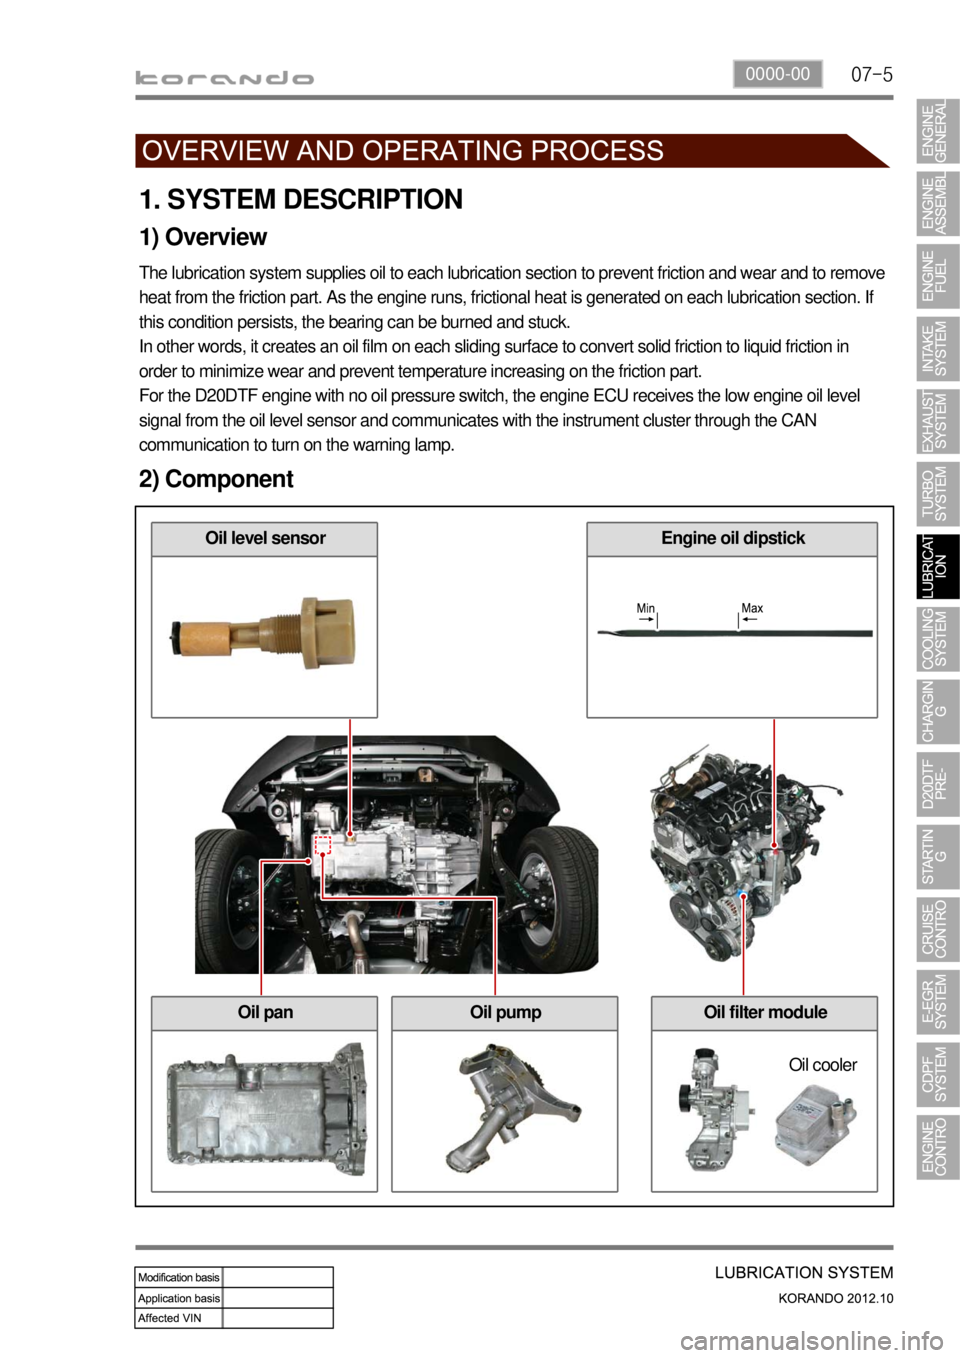 SSANGYONG KORANDO 2012  Service Manual 07-50000-00
1. SYSTEM DESCRIPTION
1) Overview
The lubrication system supplies oil to each lubrication section to prevent friction and wear and to remove 
heat from the friction part. As the engine run